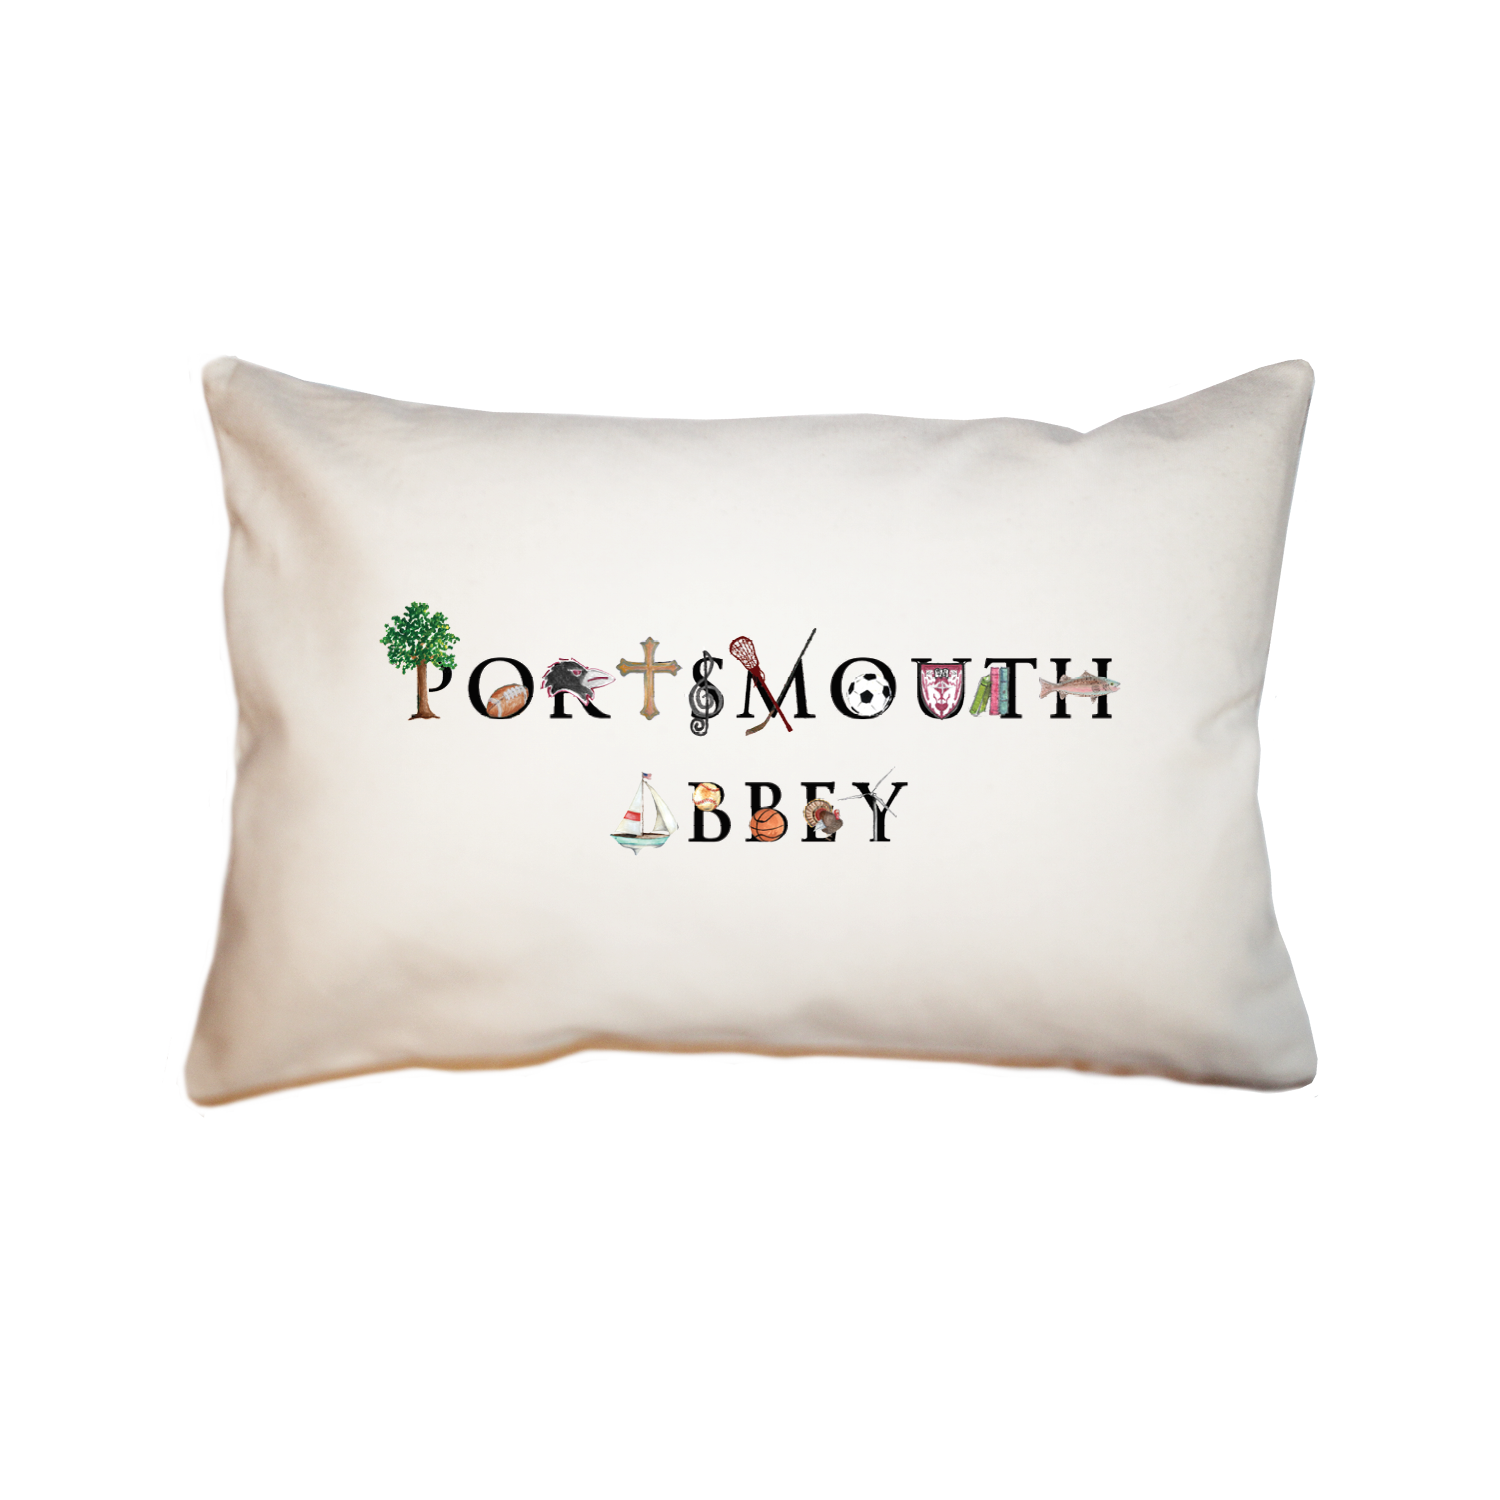 Portsmouth large rectangle pillow